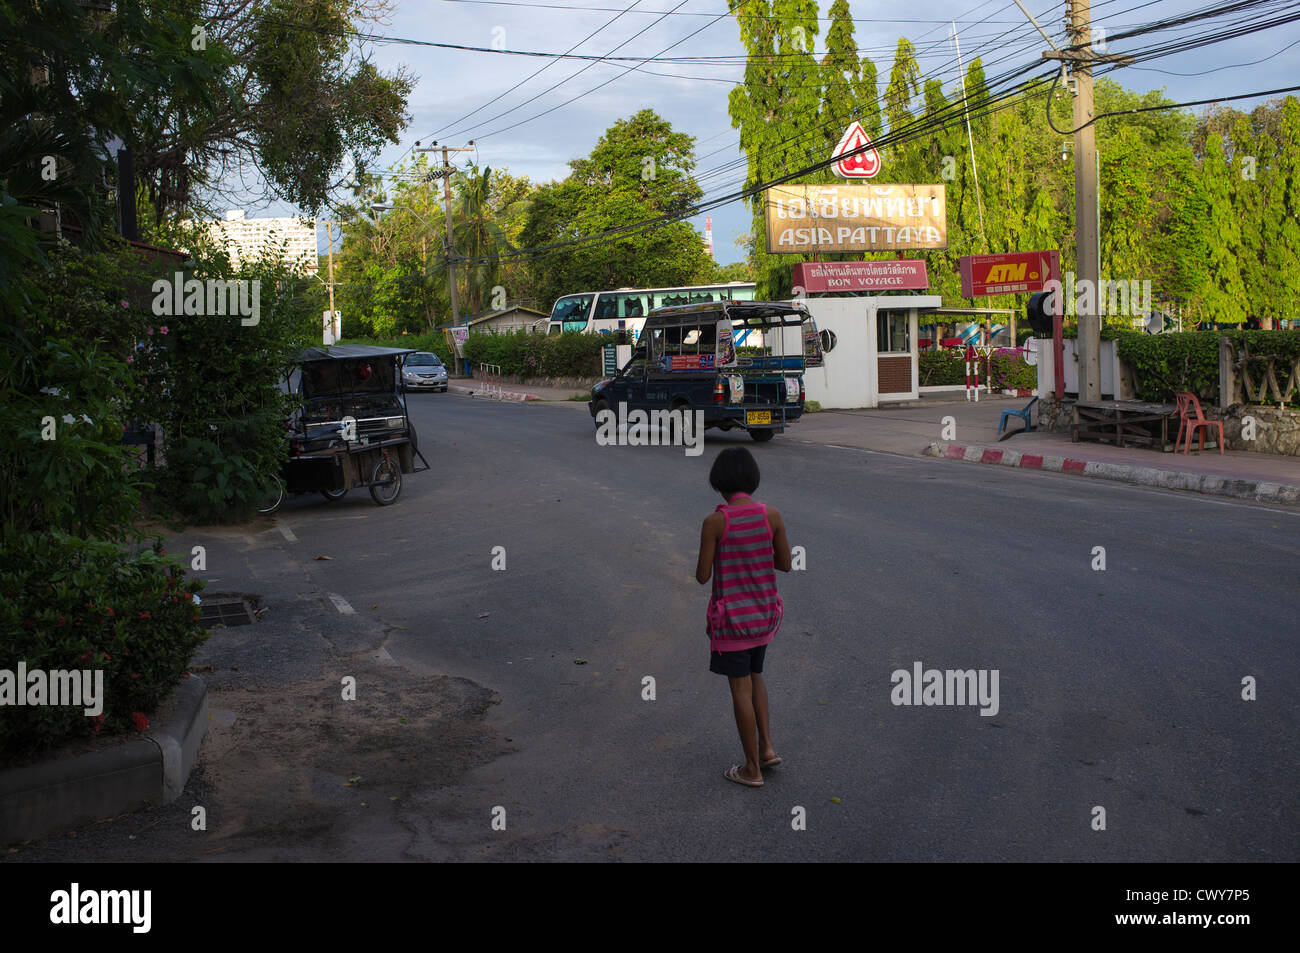 A young girl stands in a street in Pattaya, Thailand Stock Photo